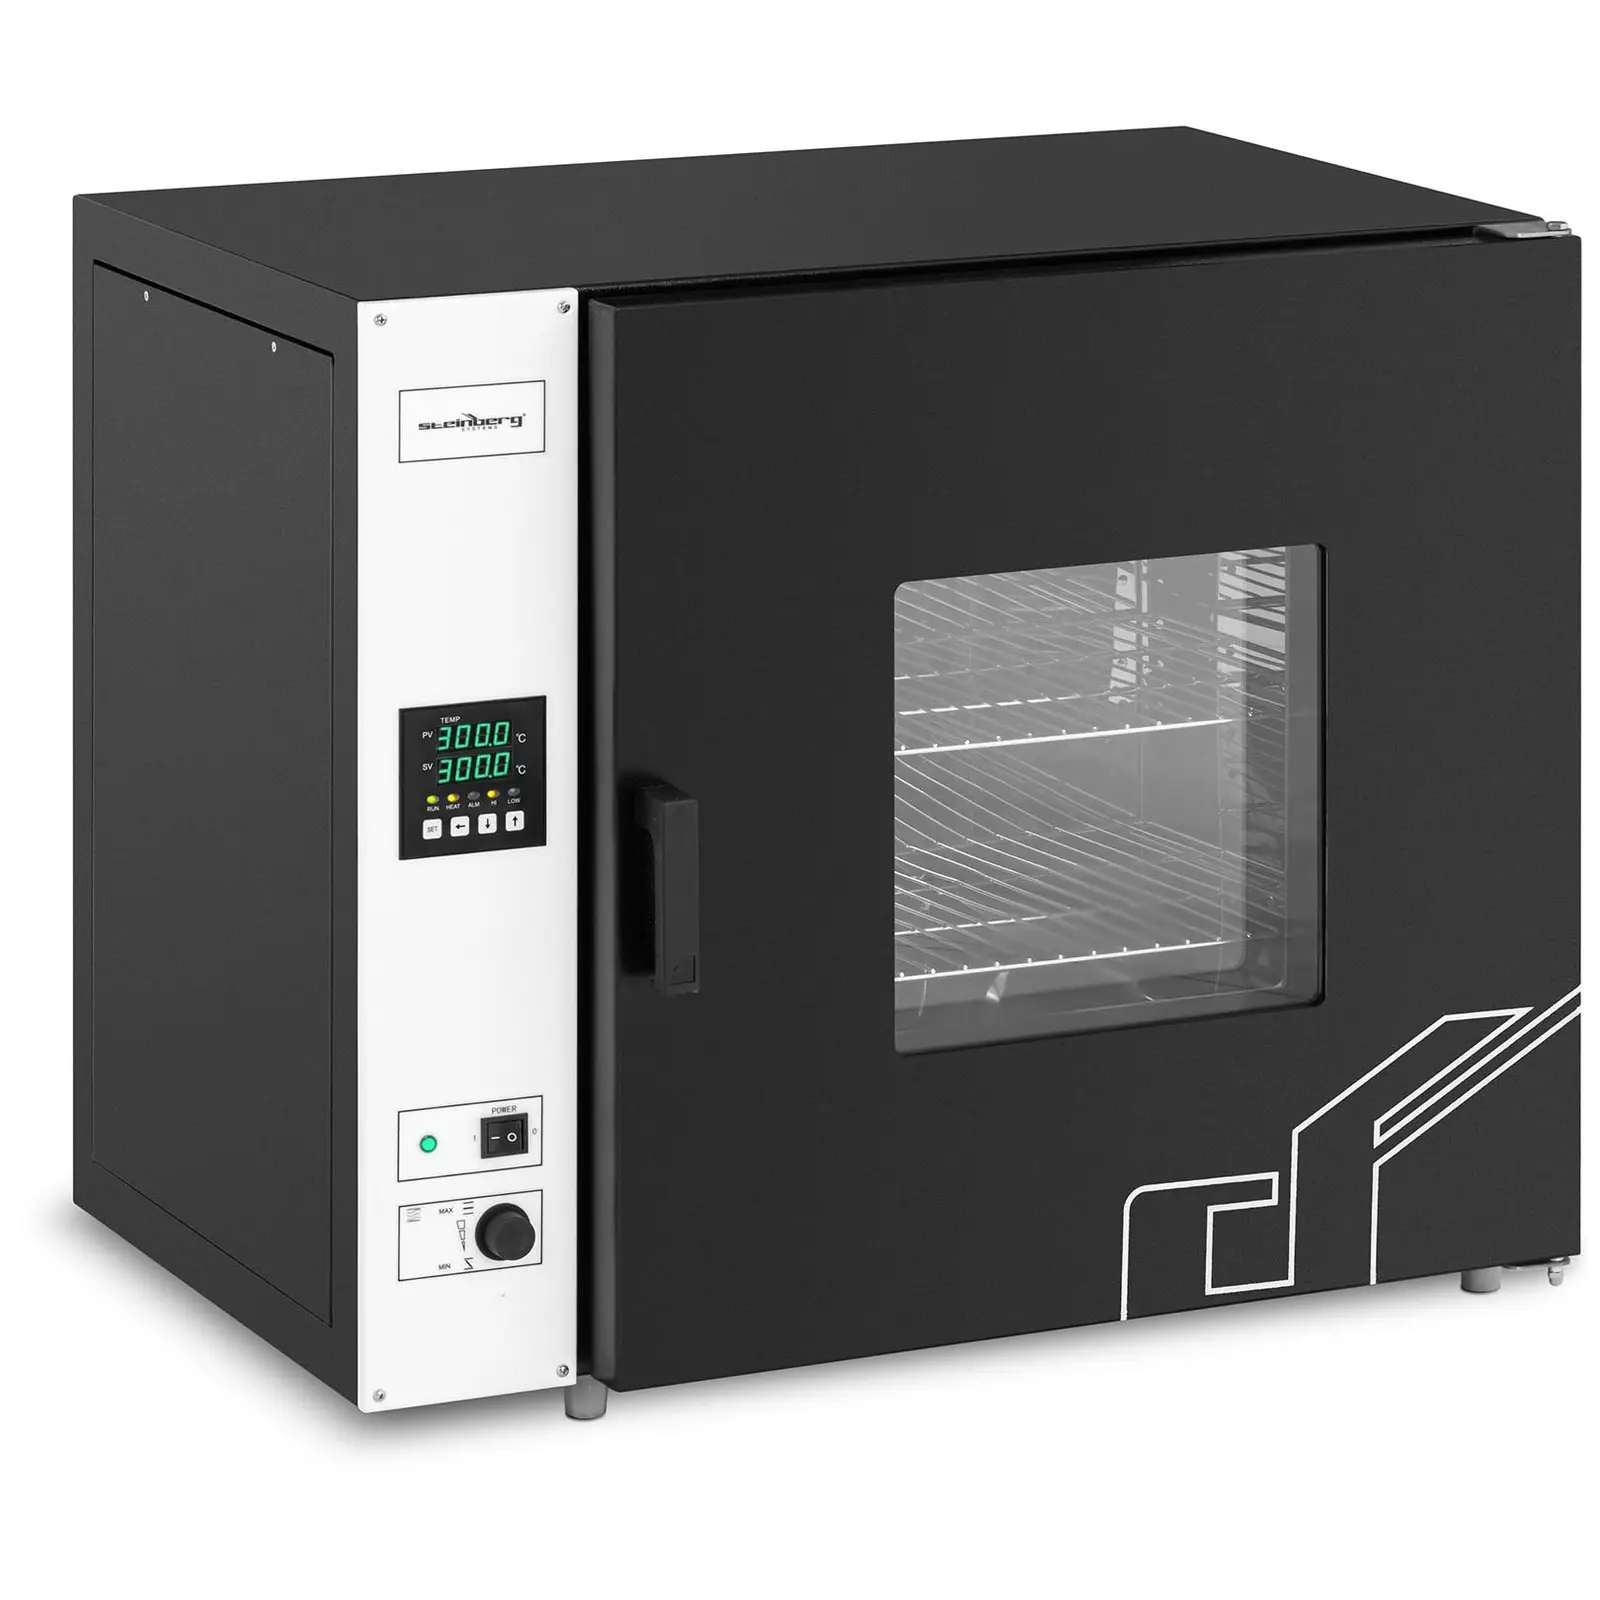 Drying Oven - 136 L - 2,170 W